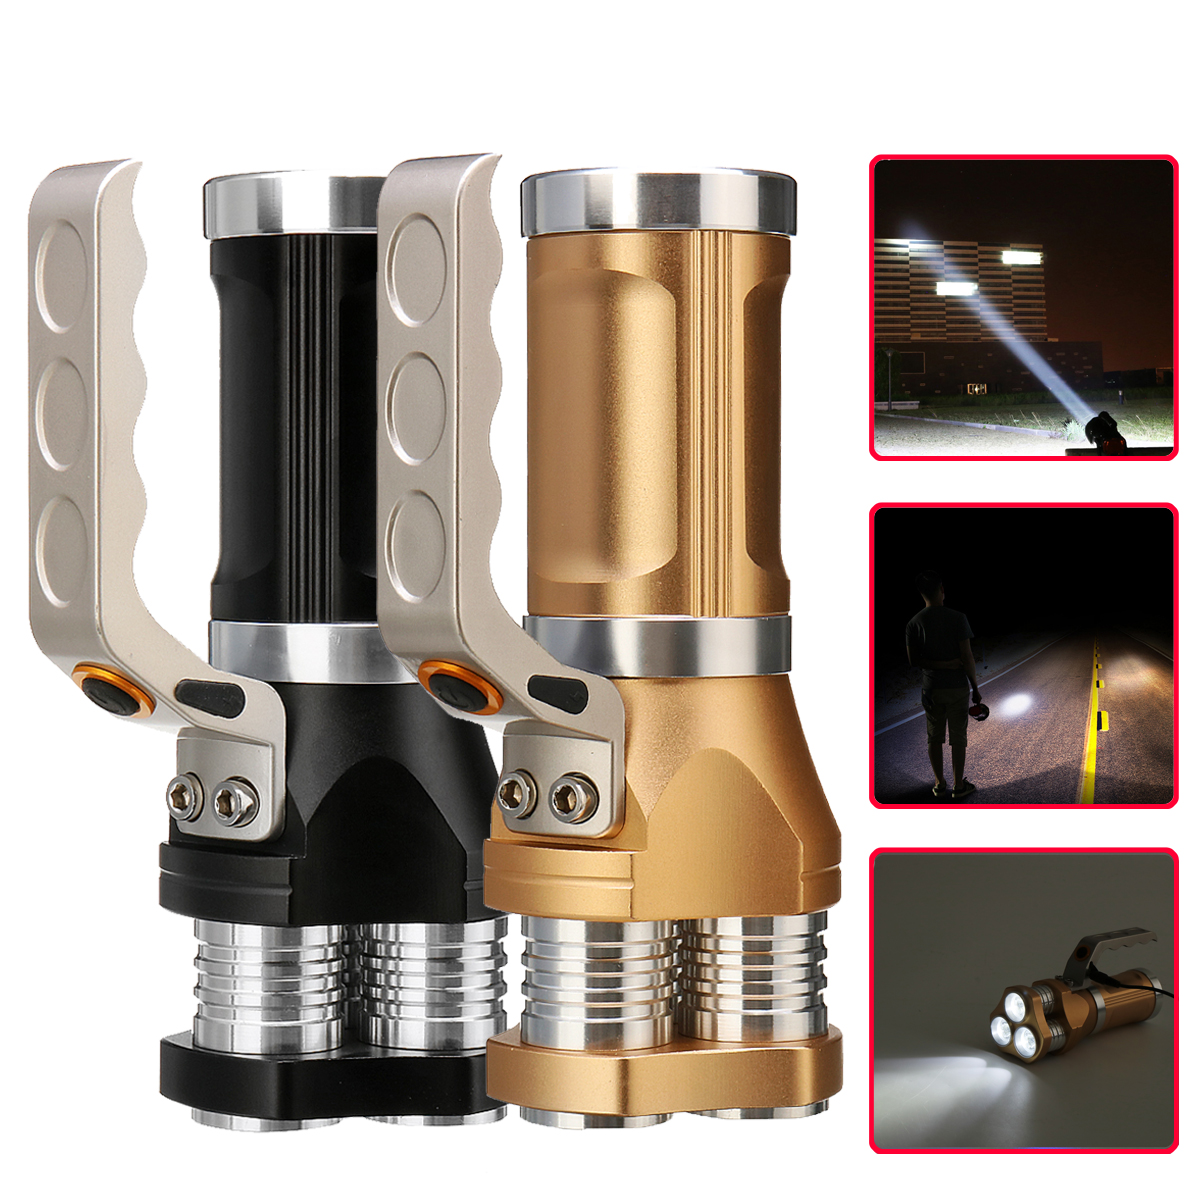 

Handheld Spotlight 3000LM AC Rechargeable Flashlight 18650 Flashlight Lamp Torch Light 18650 LED Torch